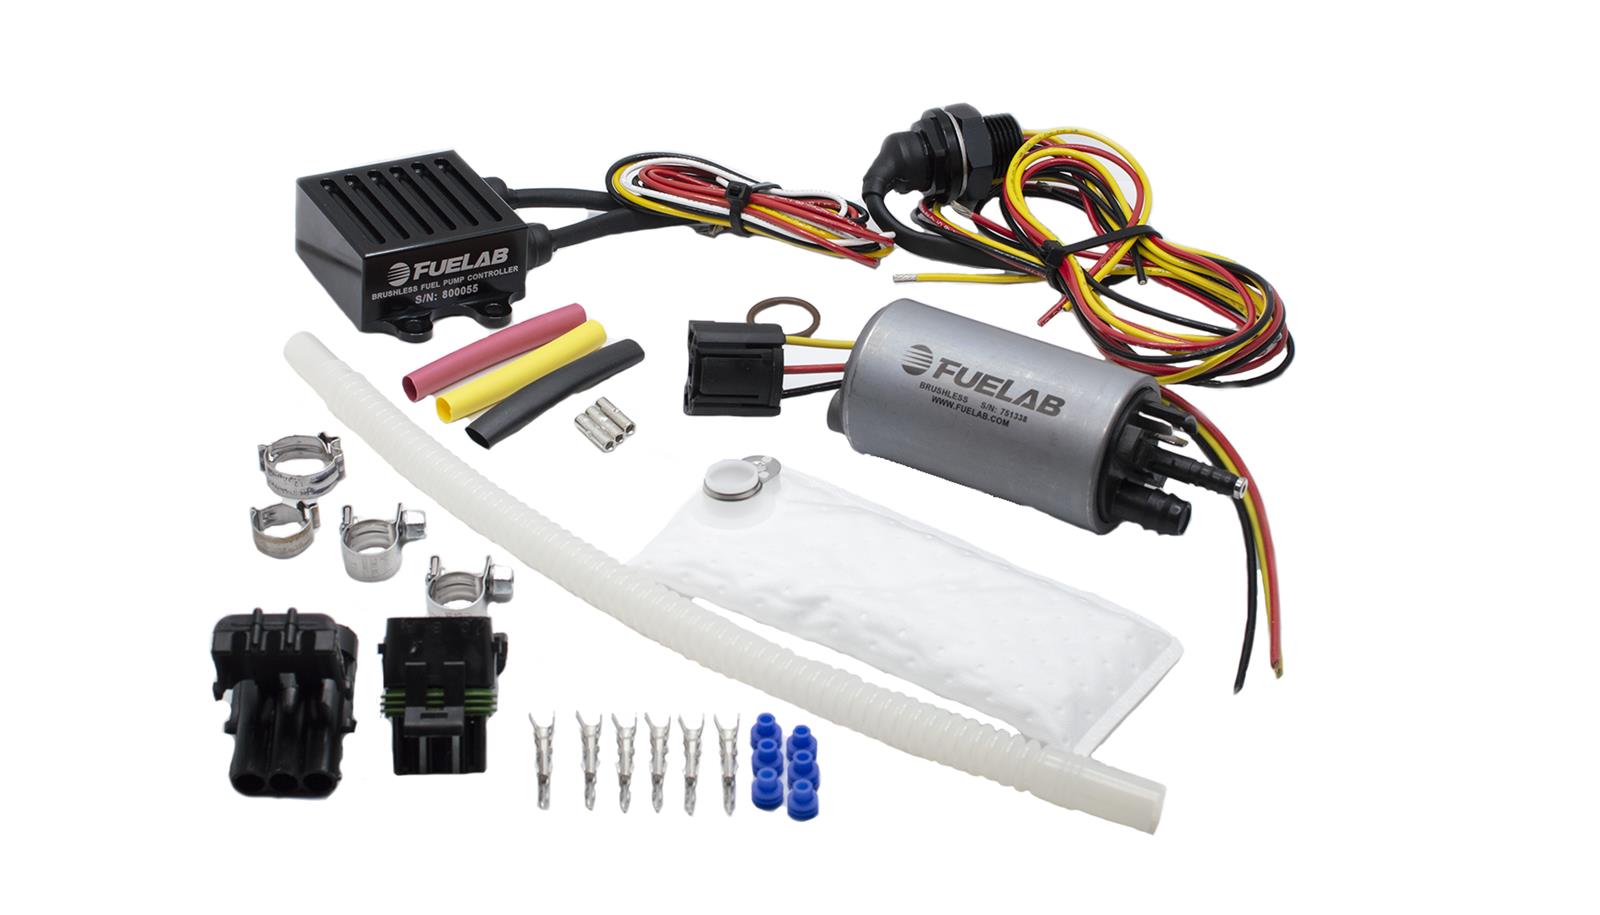 FUELAB 25314 In-Tank Brushless Fuel Pump Kit 500 LPH with 9 mm Barb Outlet, 6 mm Barb Siphon Photo-1 